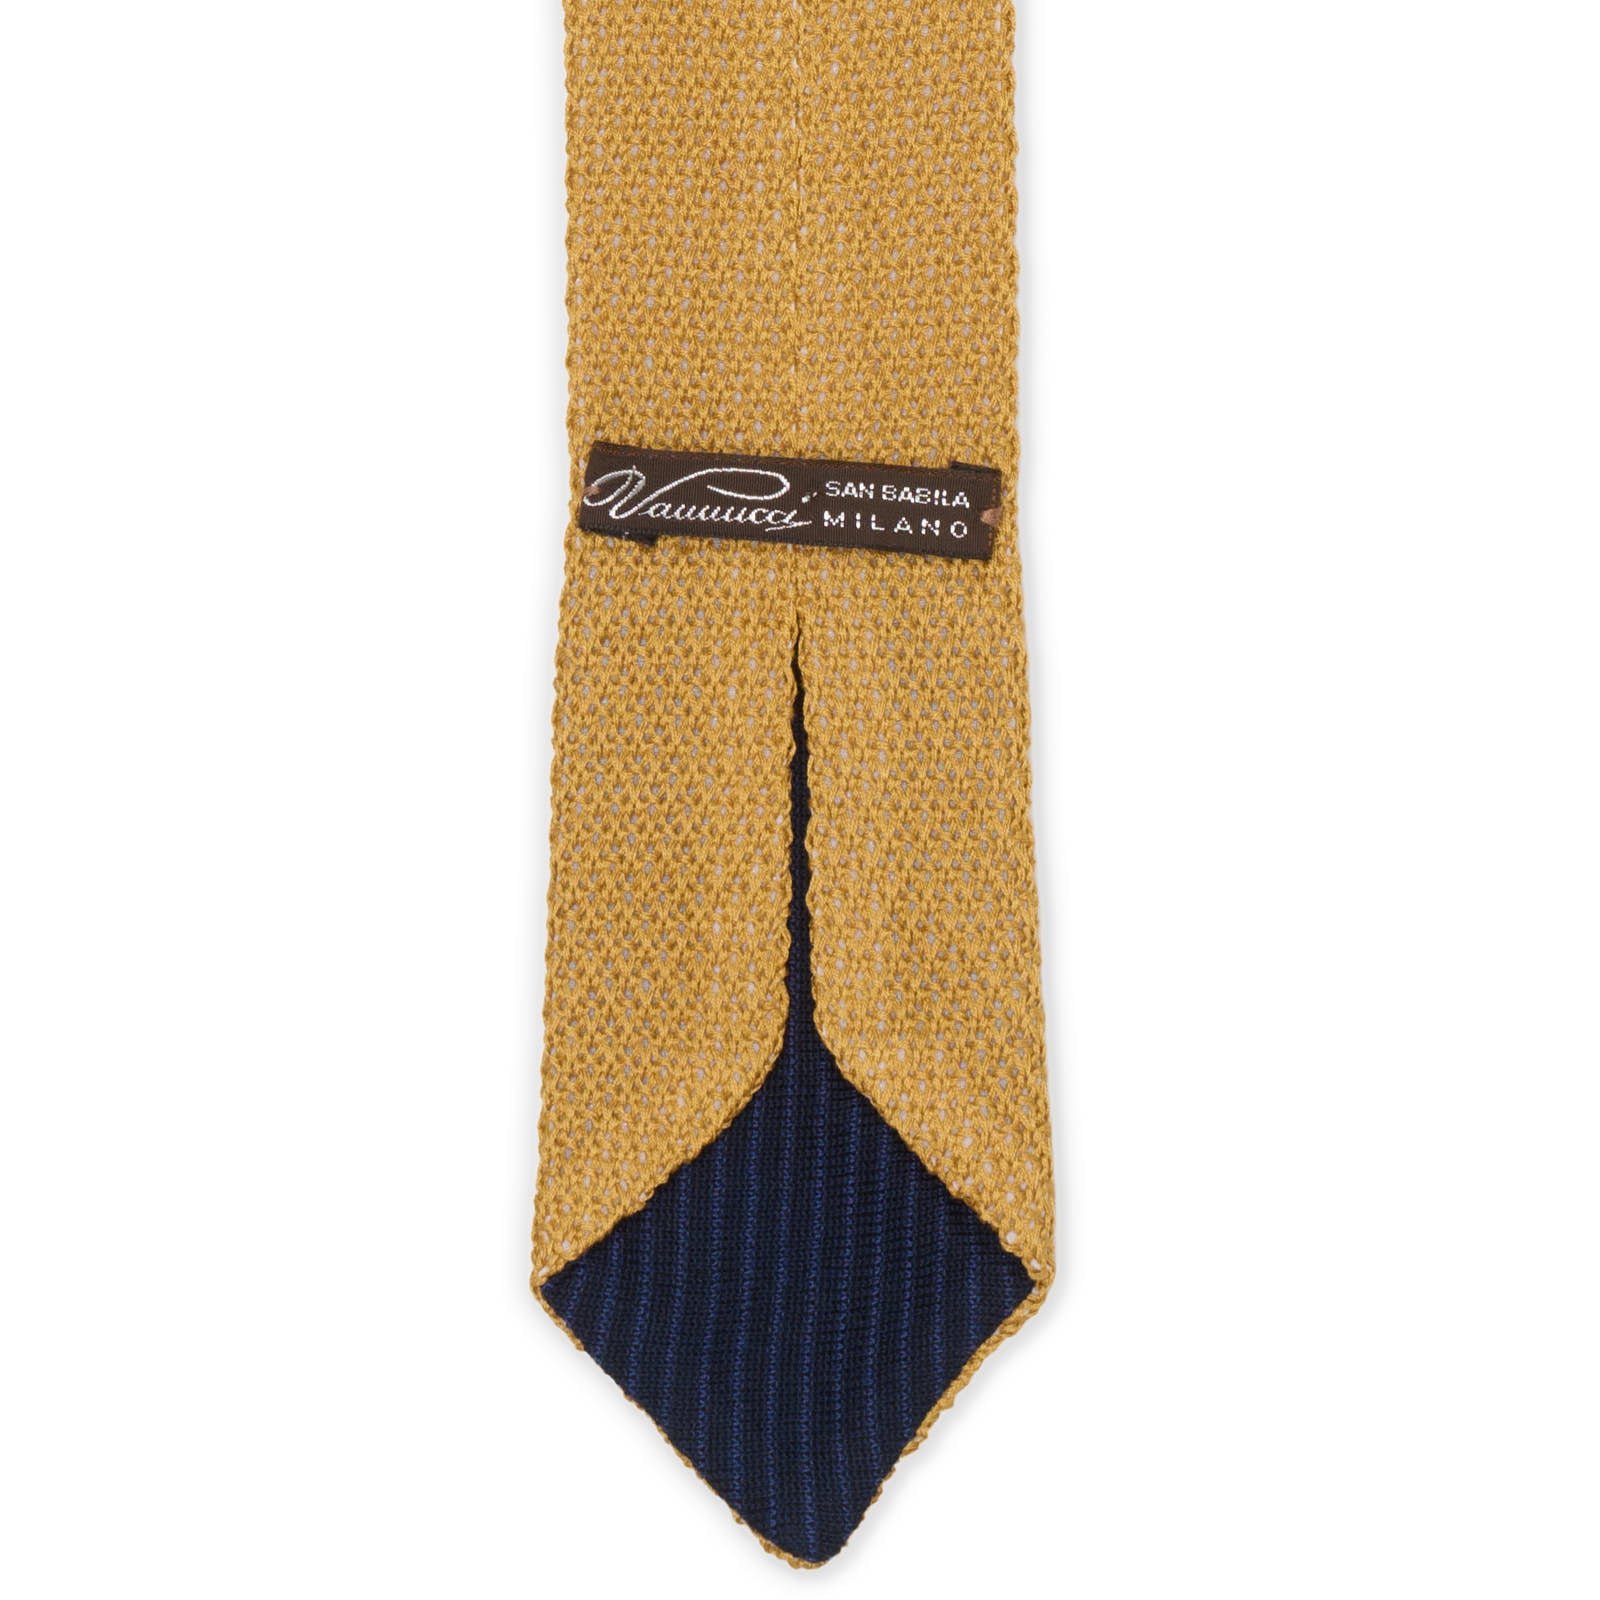 VANNUCCI MILANO Gold Knitted Cotton Tie NEW